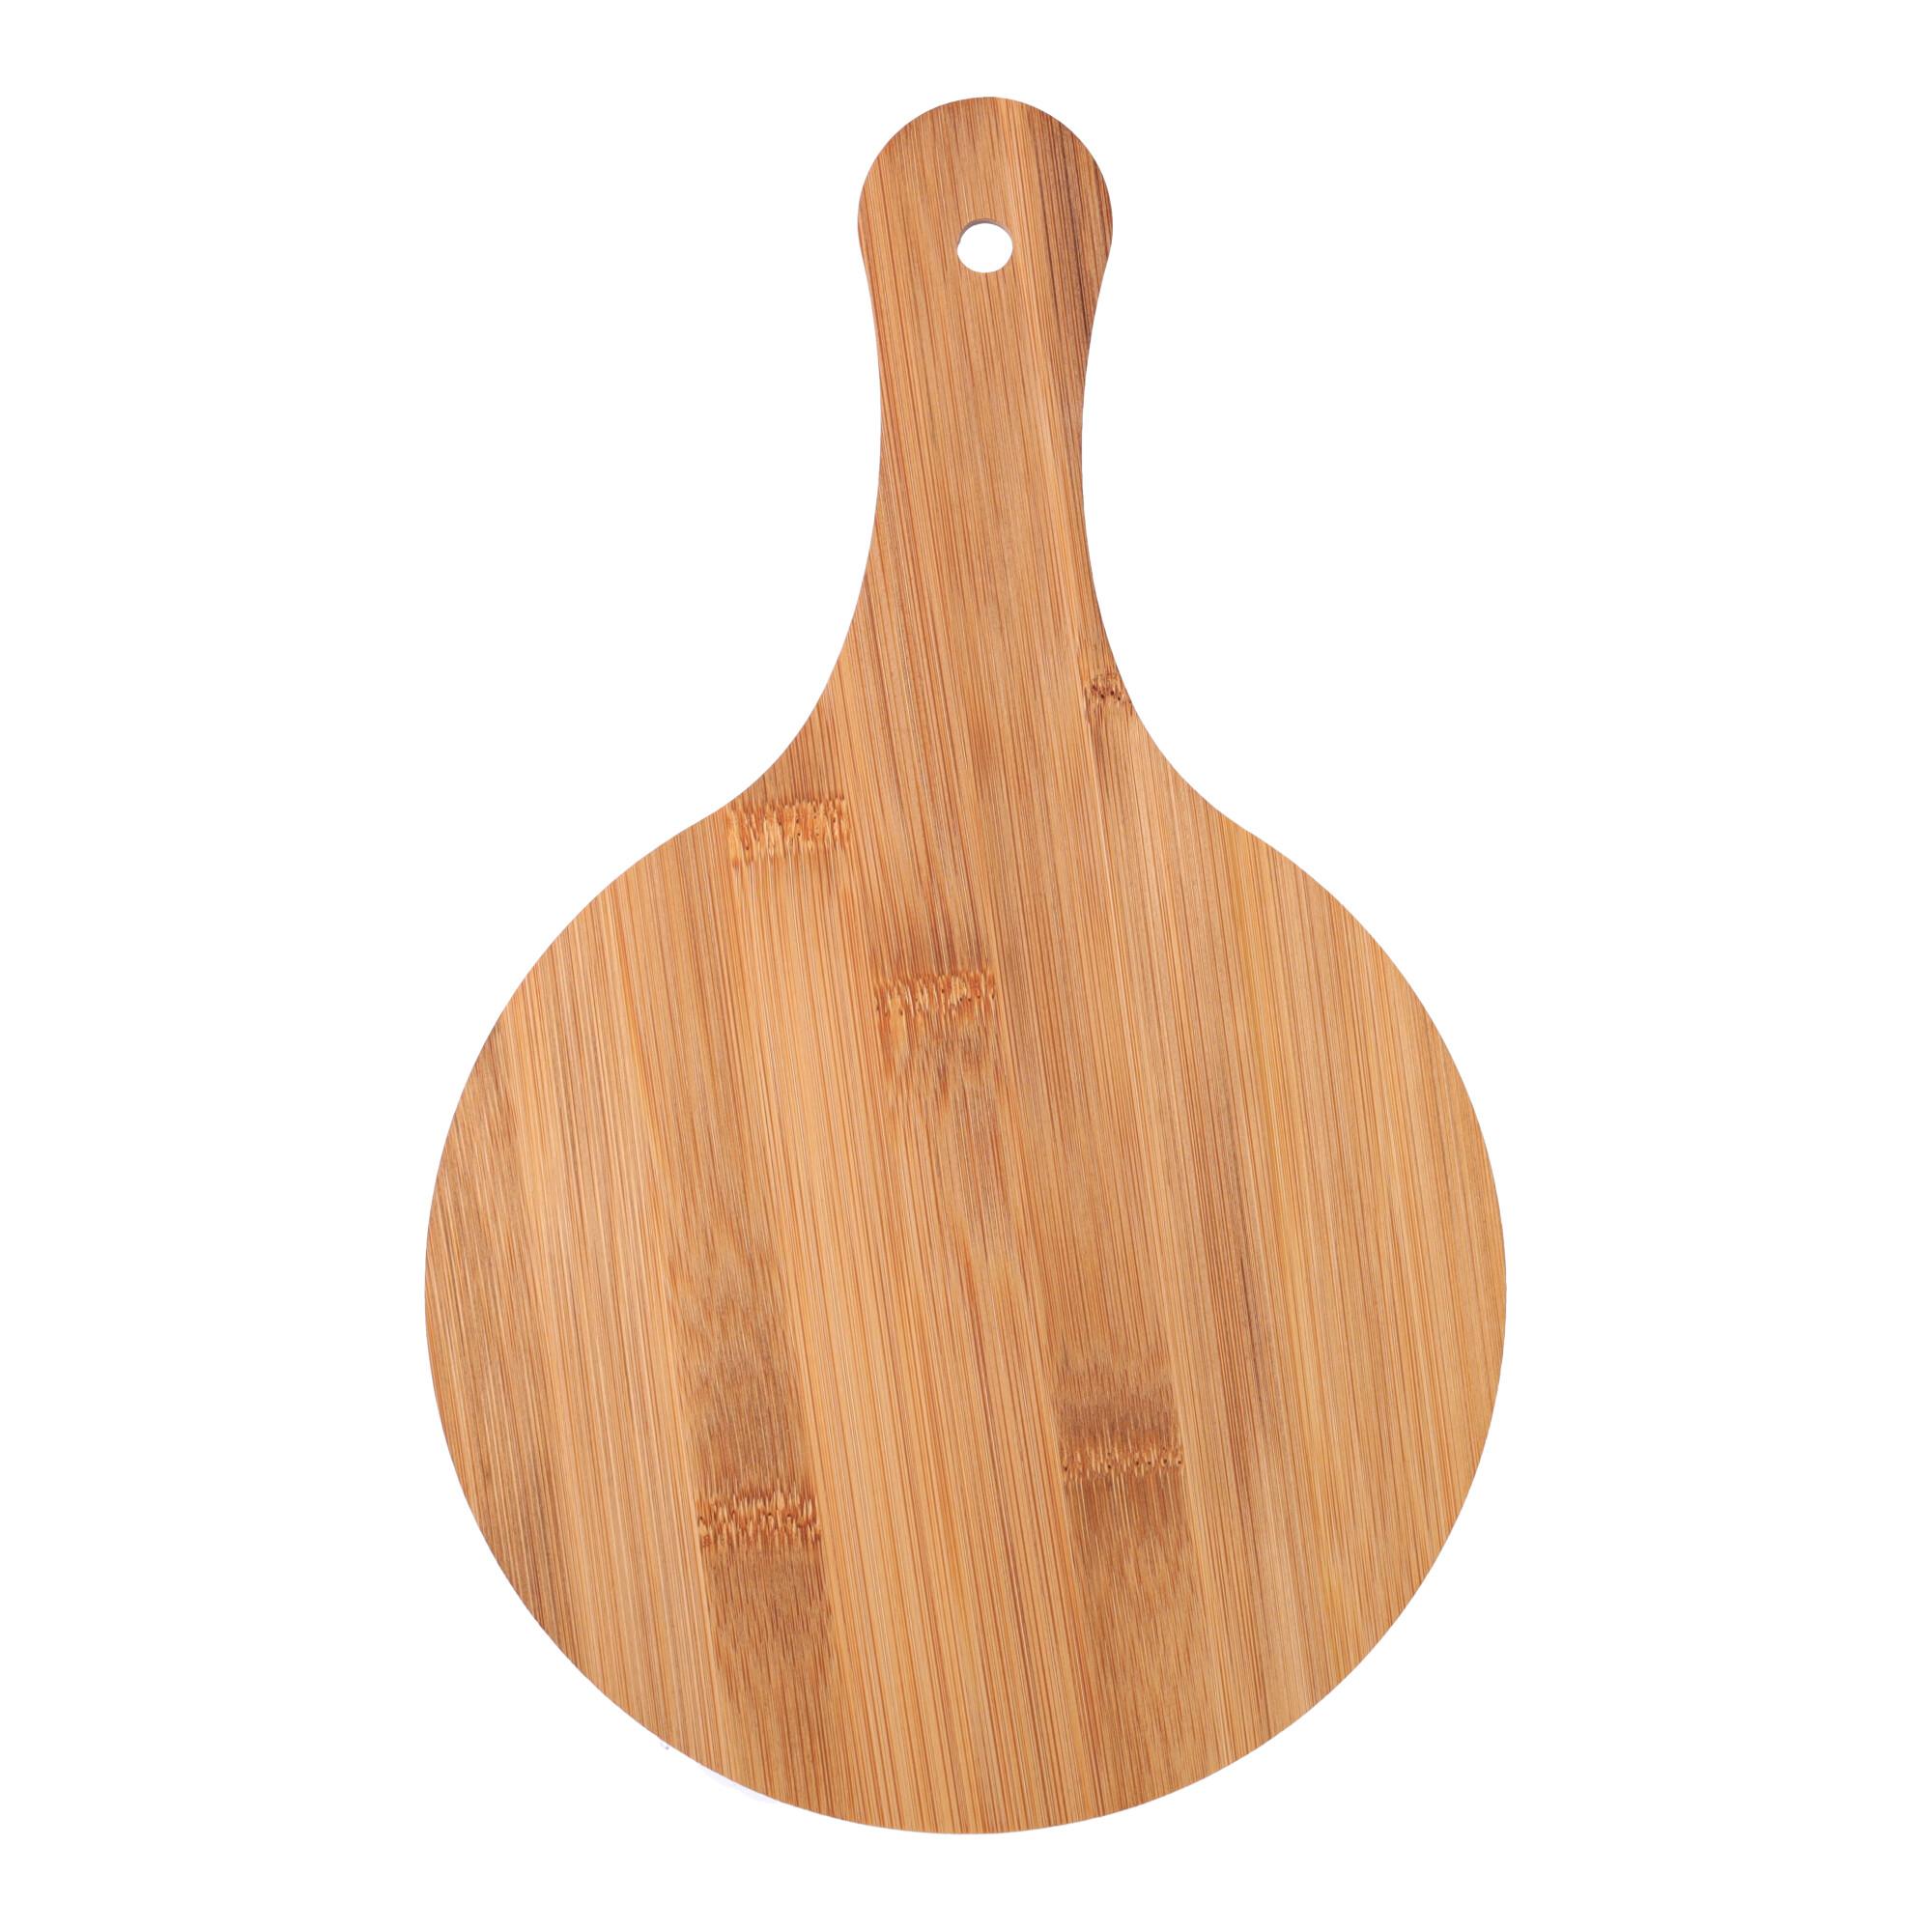 Wooden pizza board - round, size 32*20*1.1